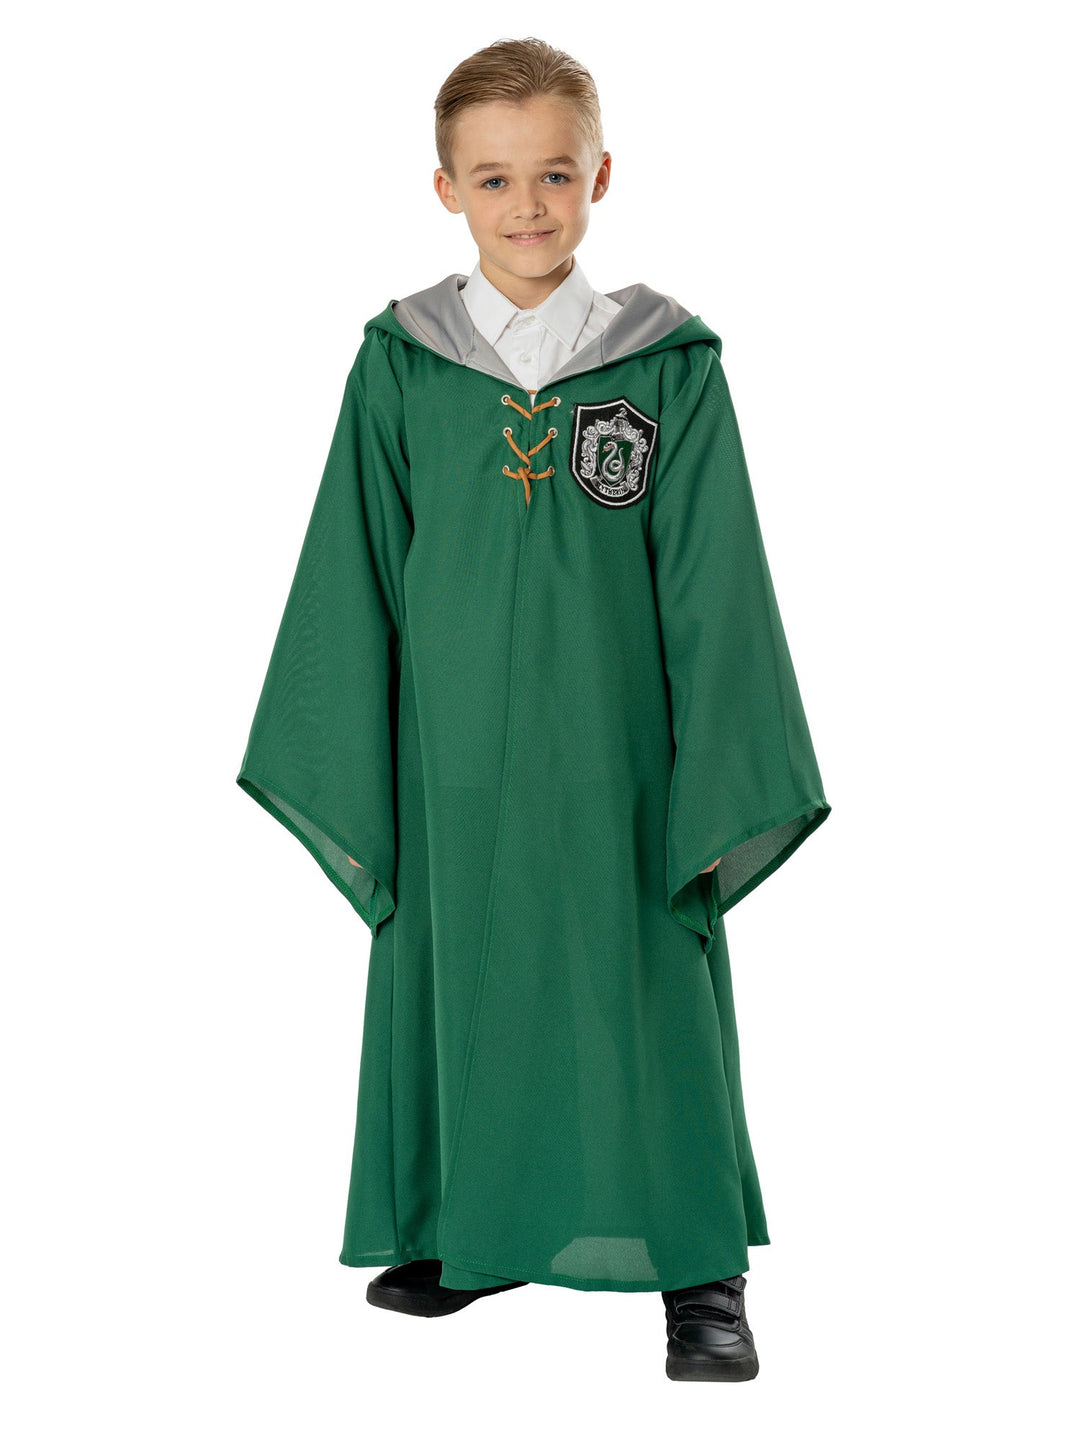 Slytherin Quidditch Robe for Kids Harry Potter Costume_3